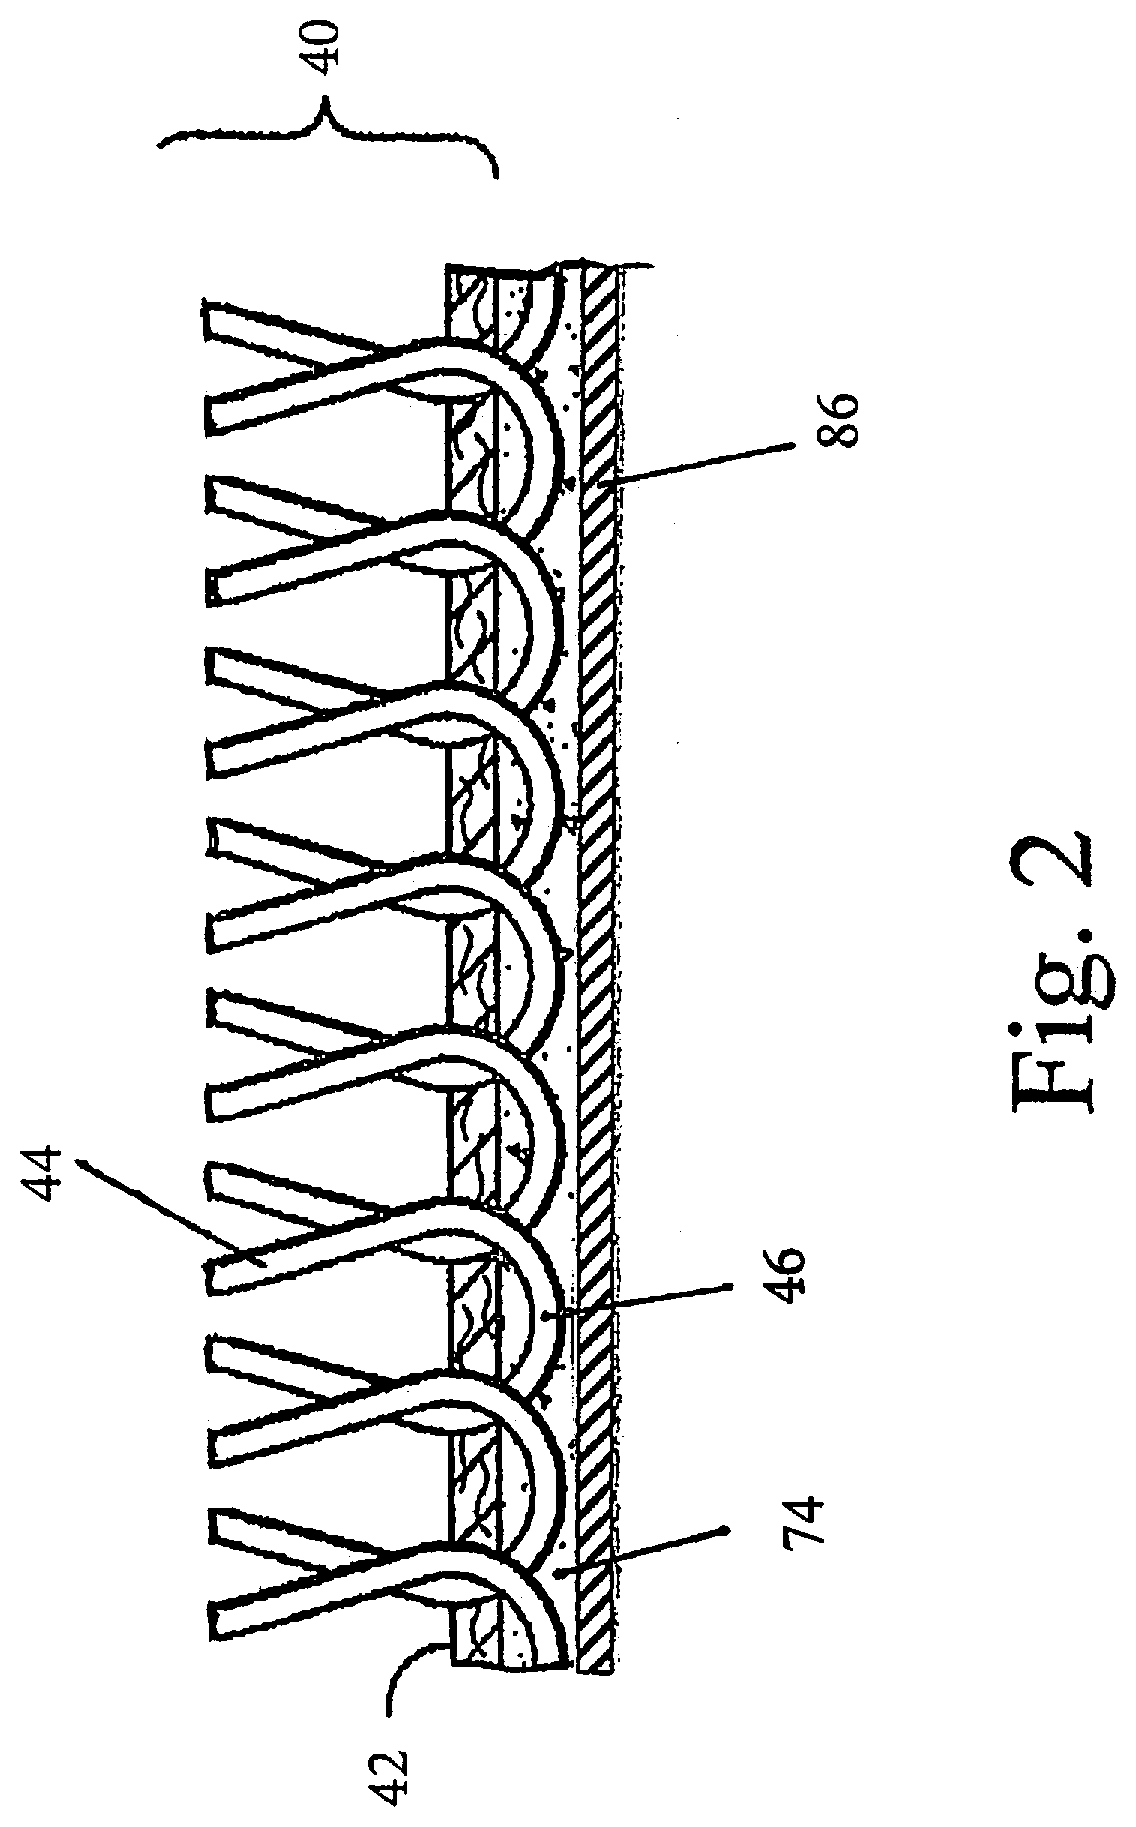 Water permeable artificial turf and method of making same